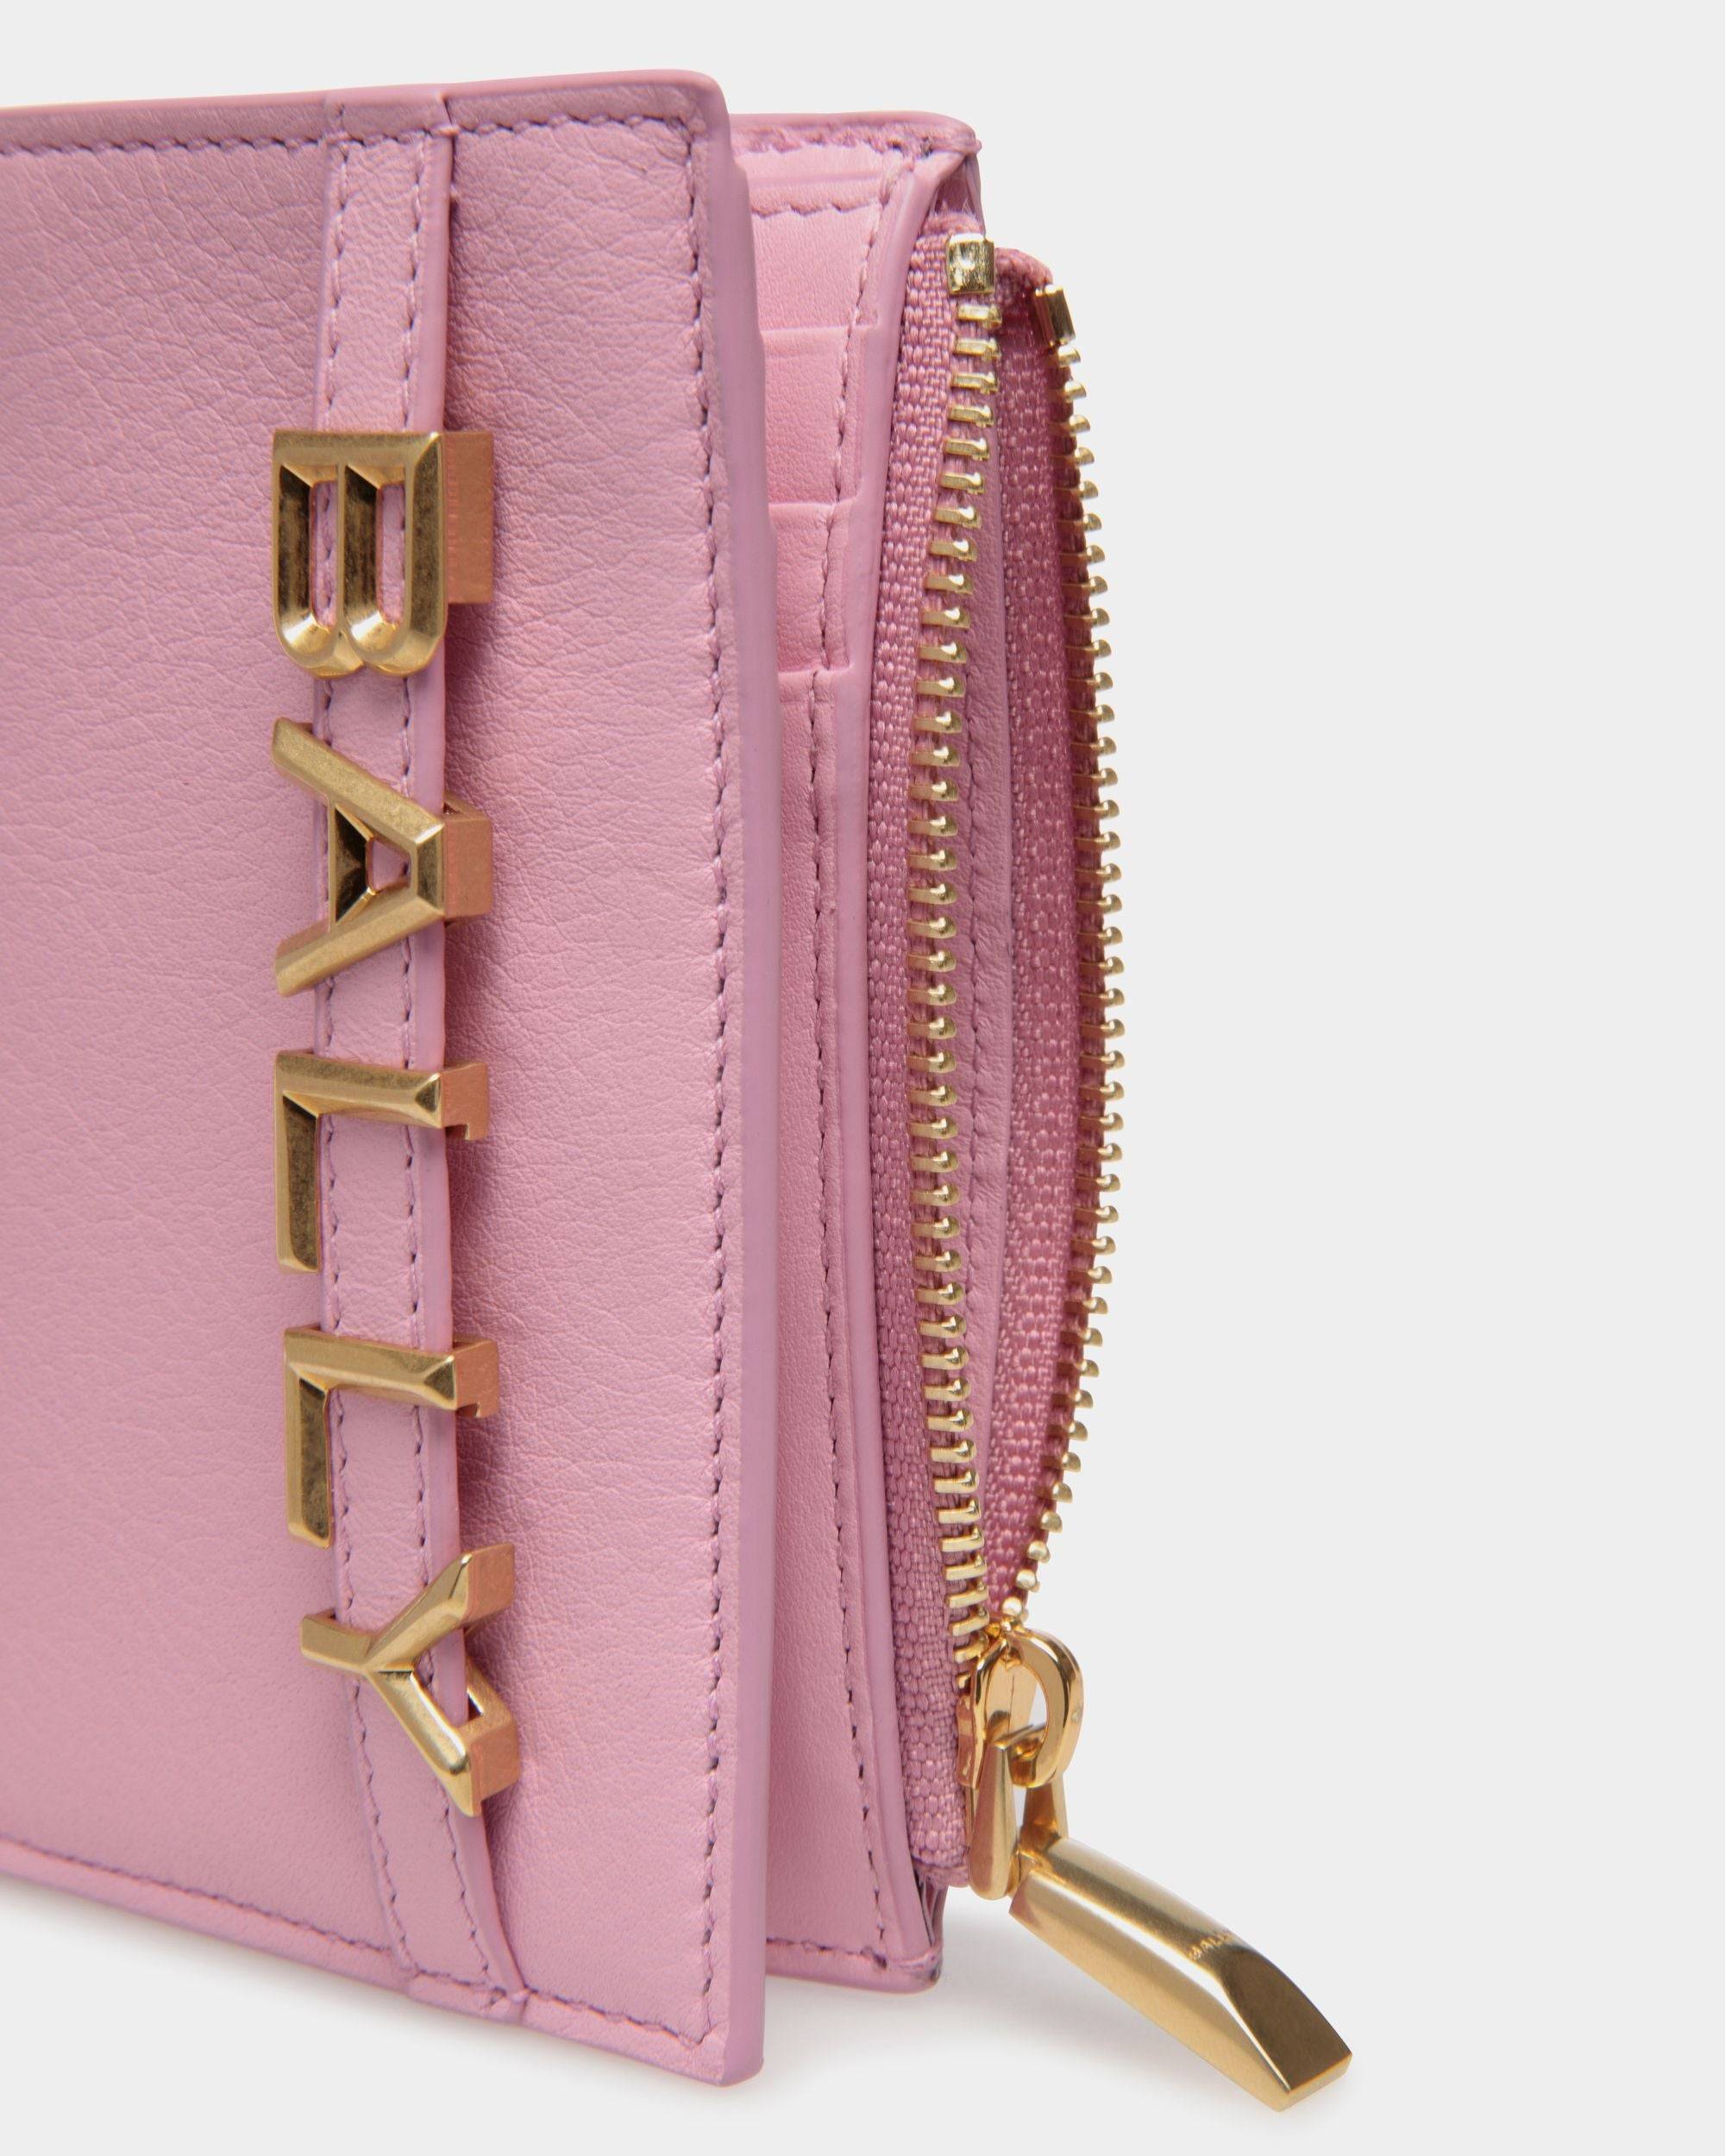 Bally Spell | Women's Wallet in Pink Leather | Bally | Still Life Detail